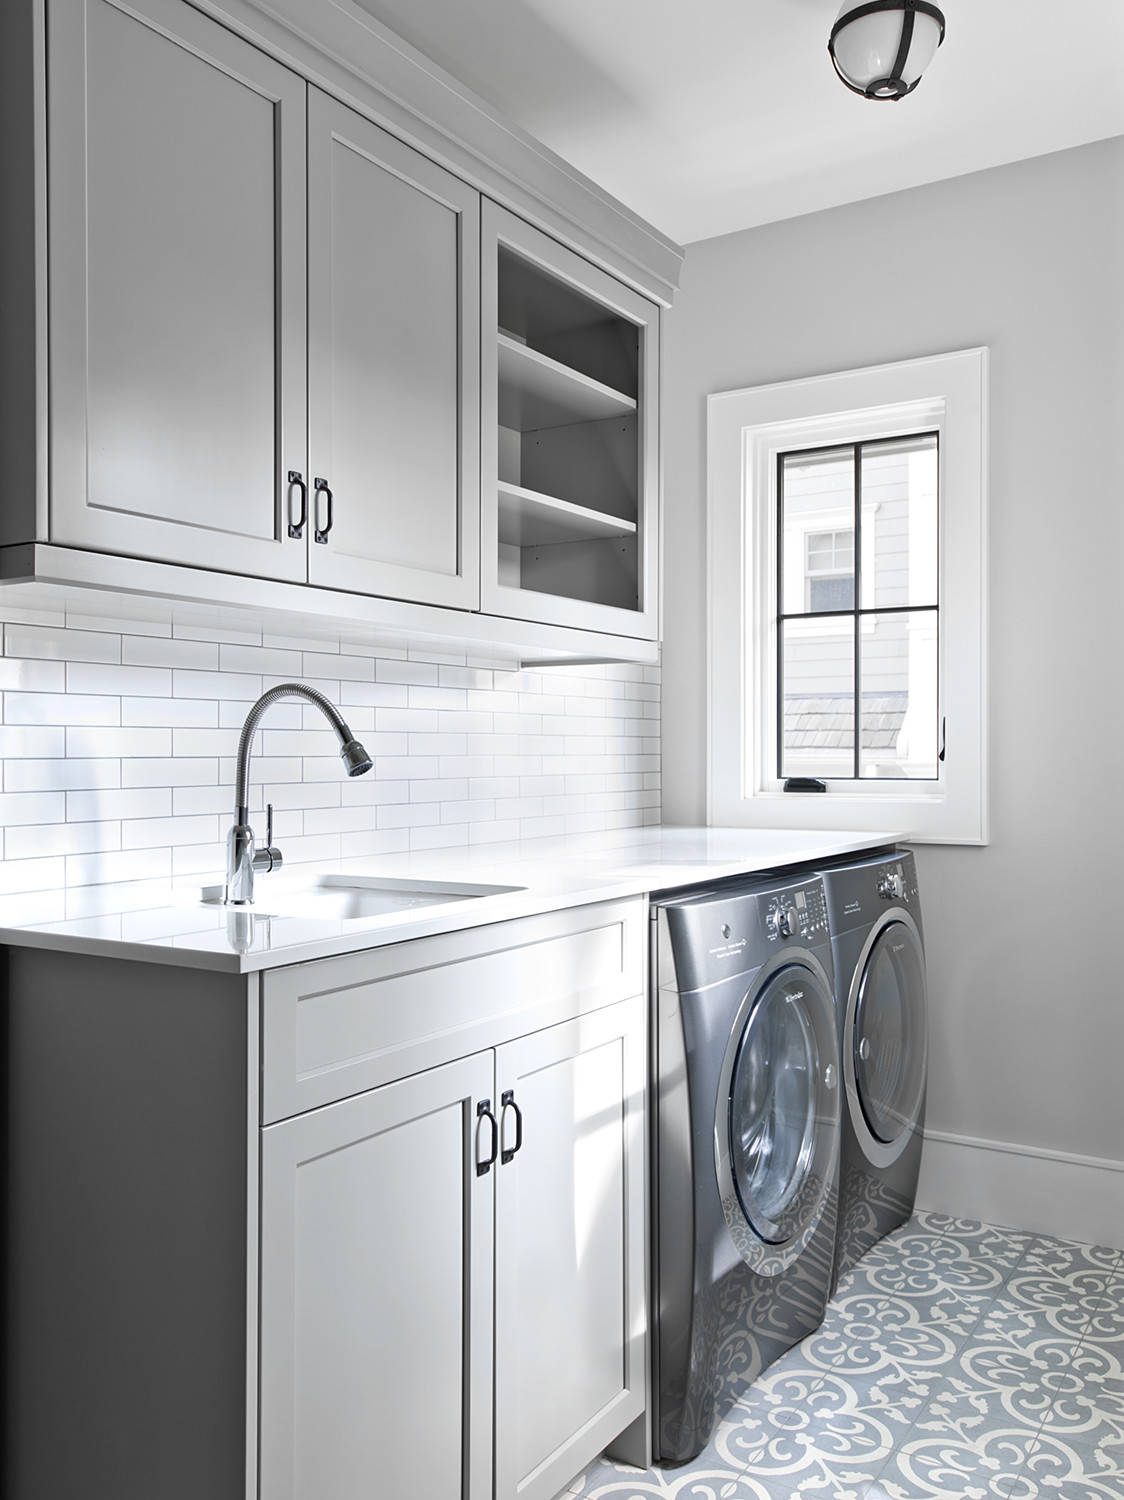 https://st.hzcdn.com/simgs/pictures/laundry-rooms/hinsdale-showhouse-cynthia-lynn-photography-img~28b1ce8f0b2be5f8_14-7138-1-41d47ea.jpg